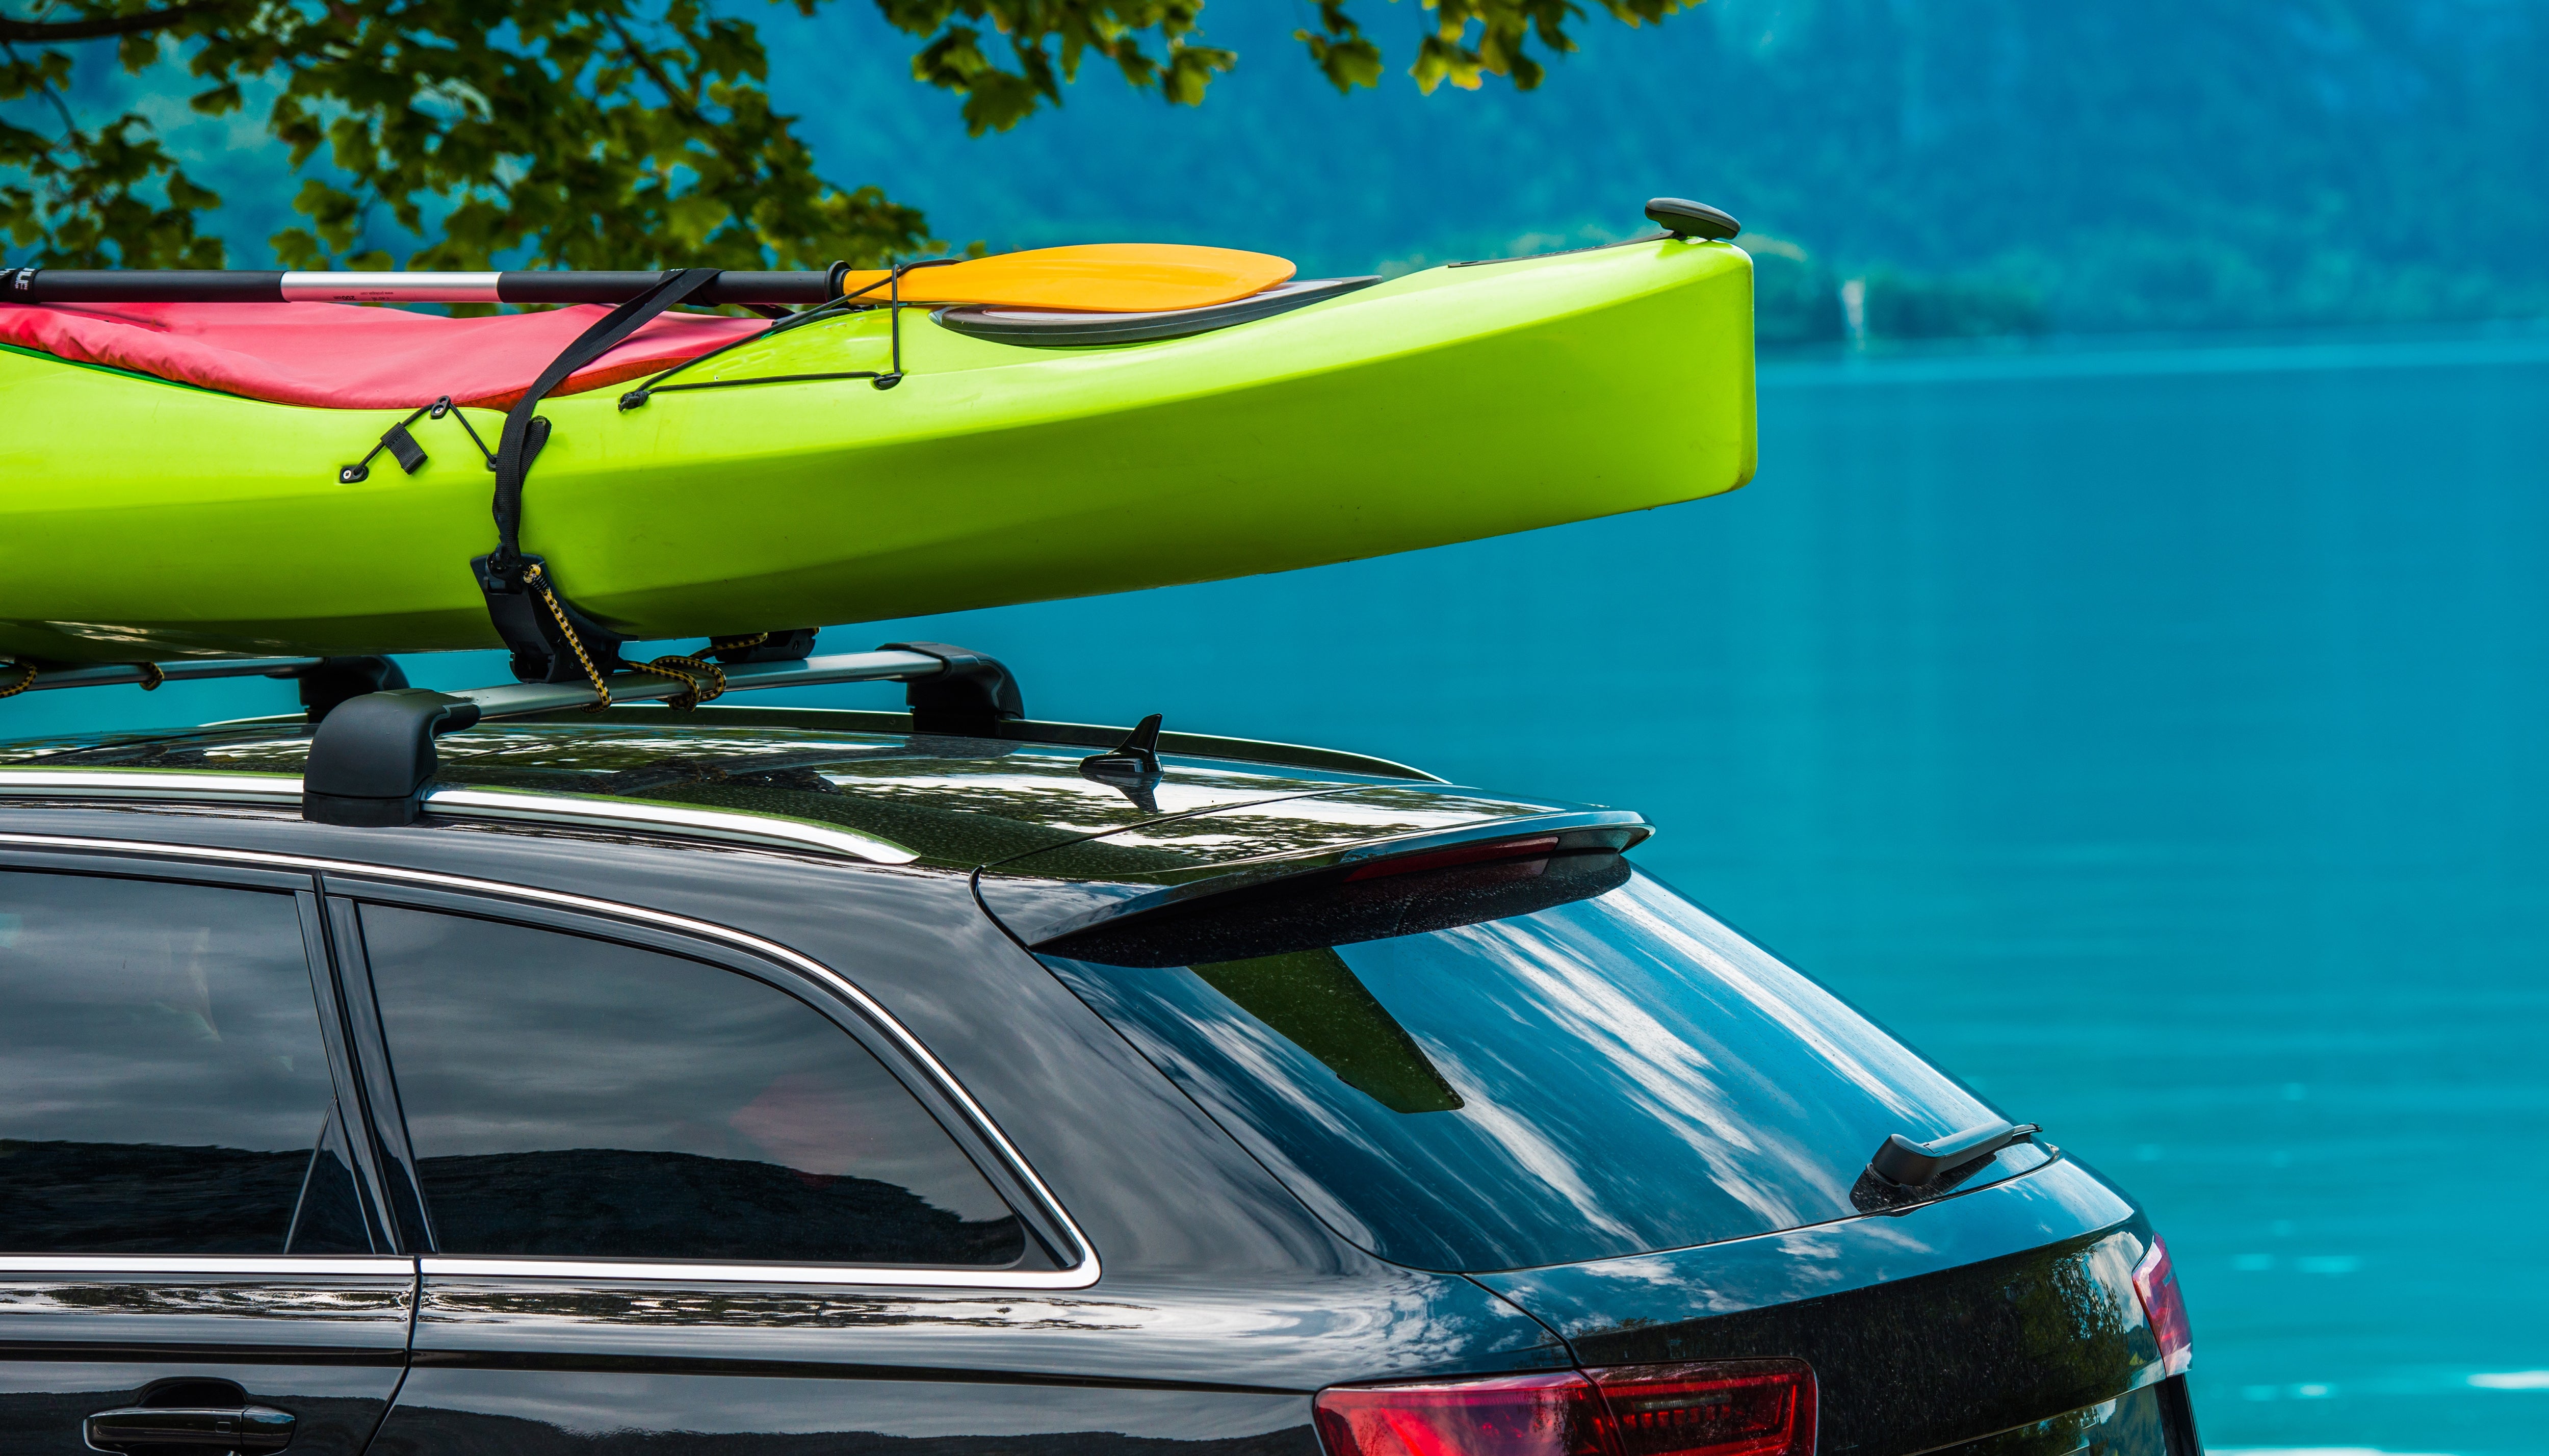 Kayak Storage Racks, Store Your Kayak Safely and Securely